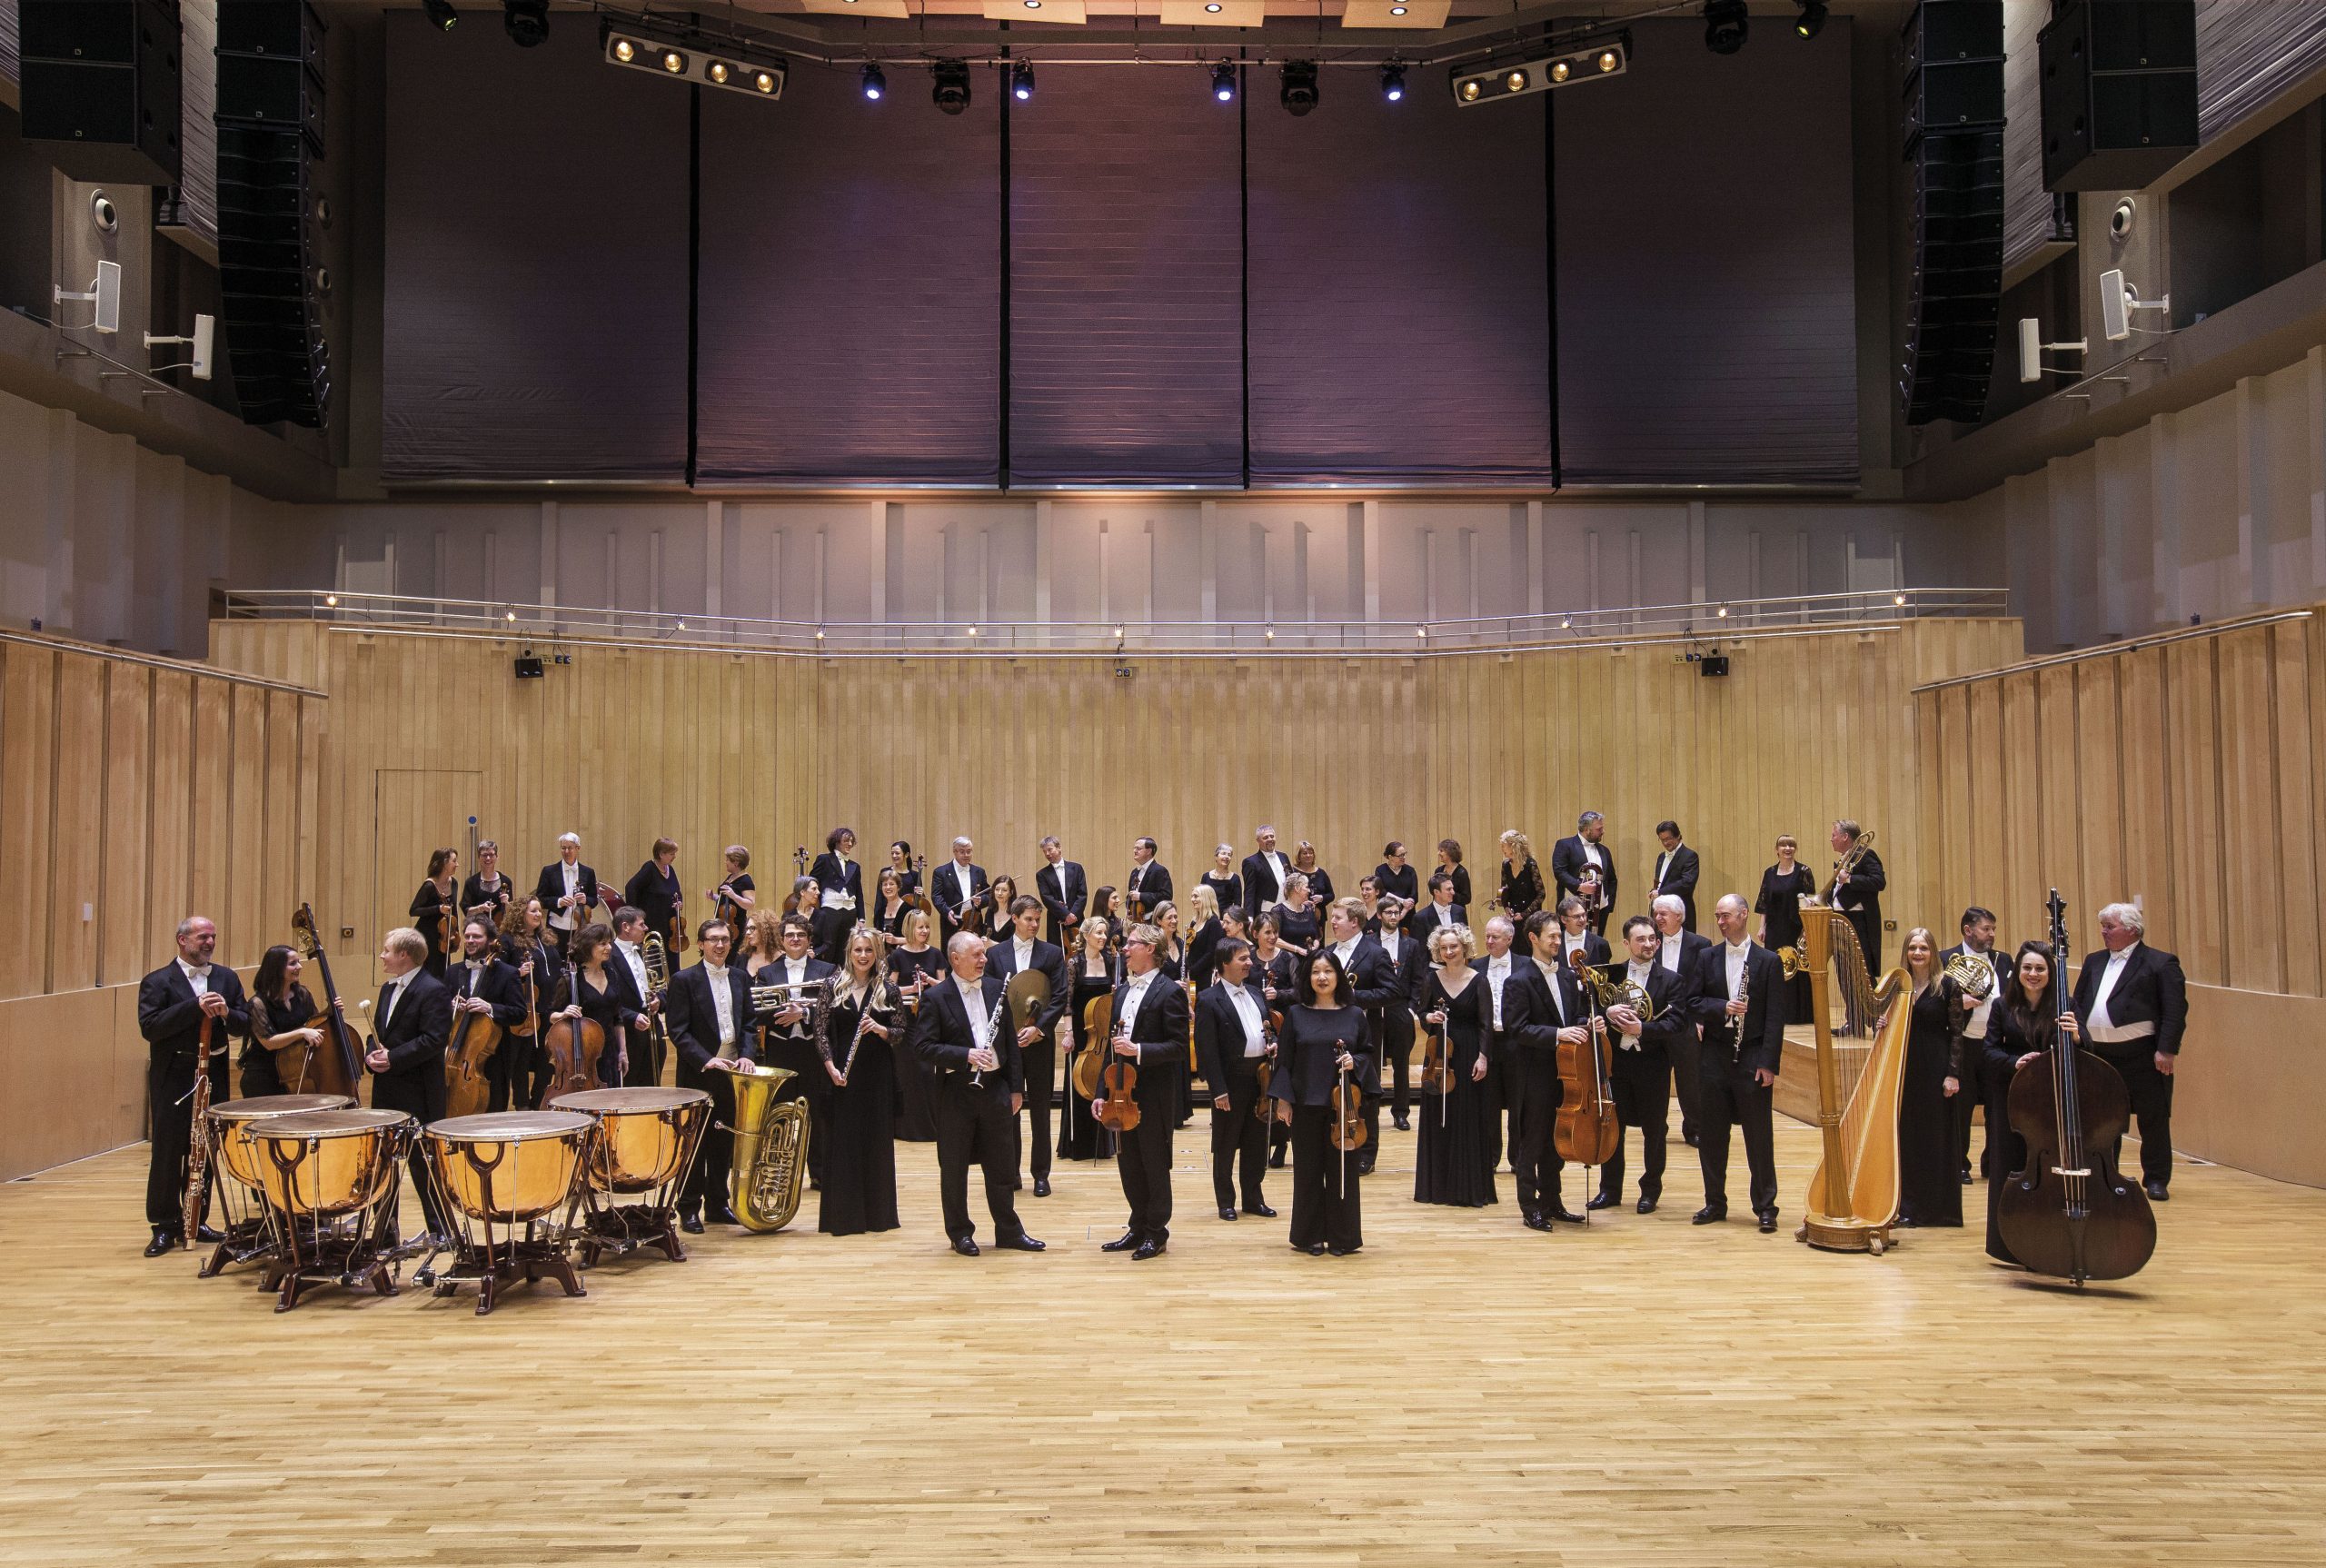 Royal Scottish National Orchestra (RSNO): The Open Fund For Organisations